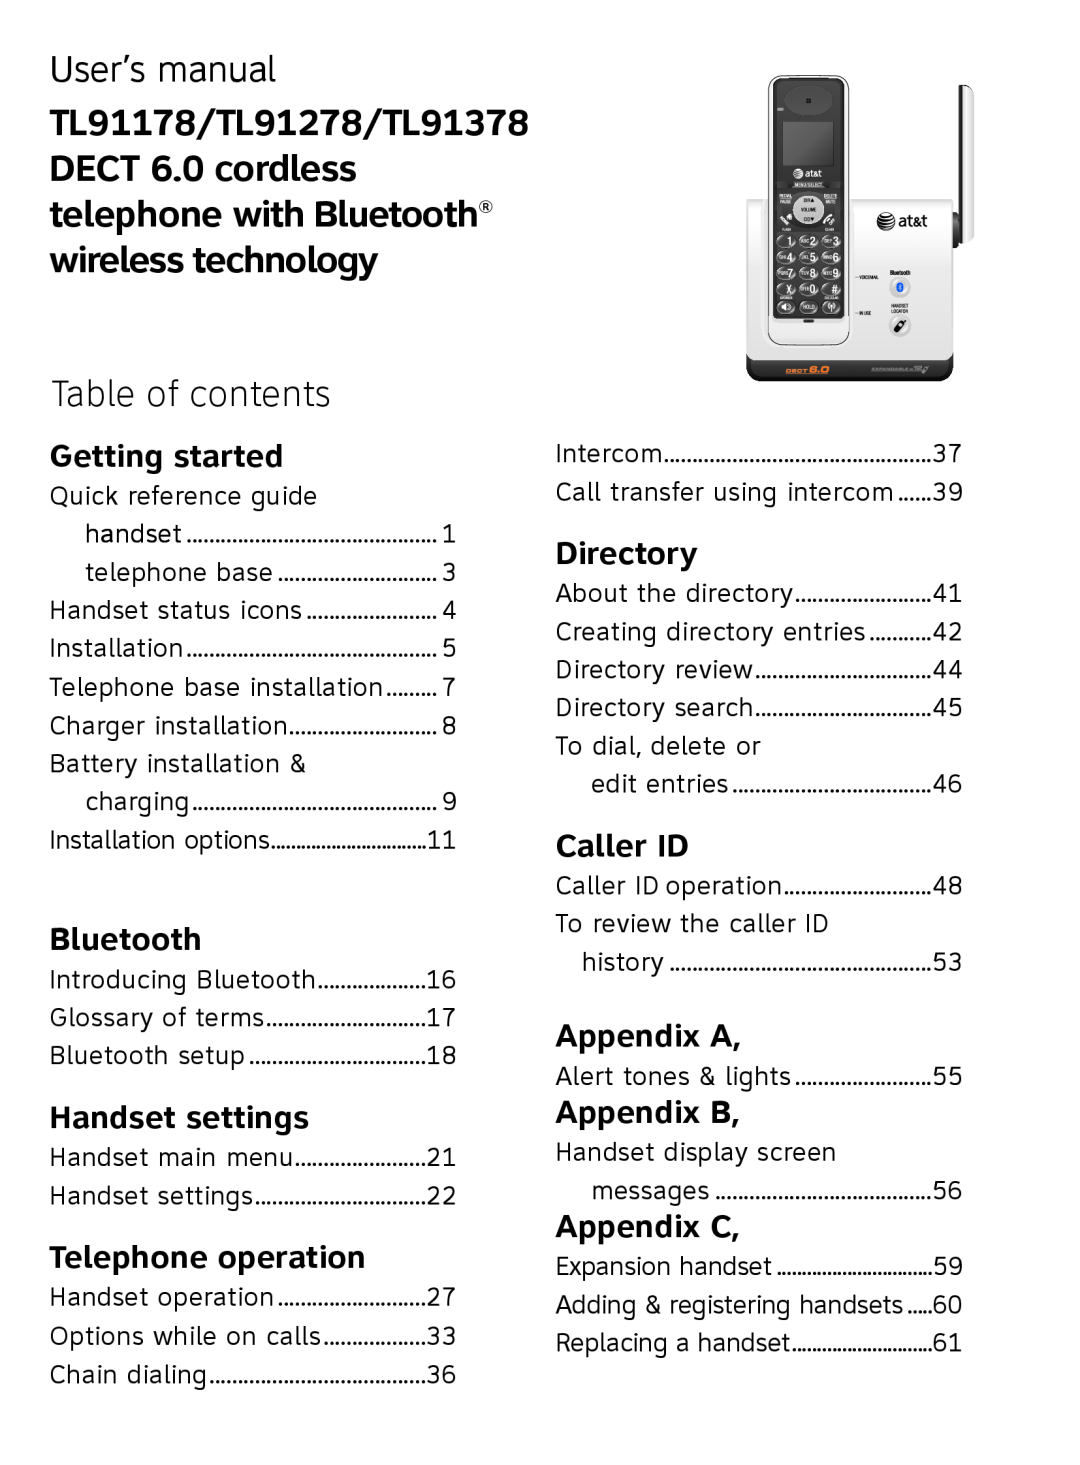 AT&T TL9178 Table of contents, Getting started, Bluetooth, Handset settings, Telephone operation, Directory, Caller ID 